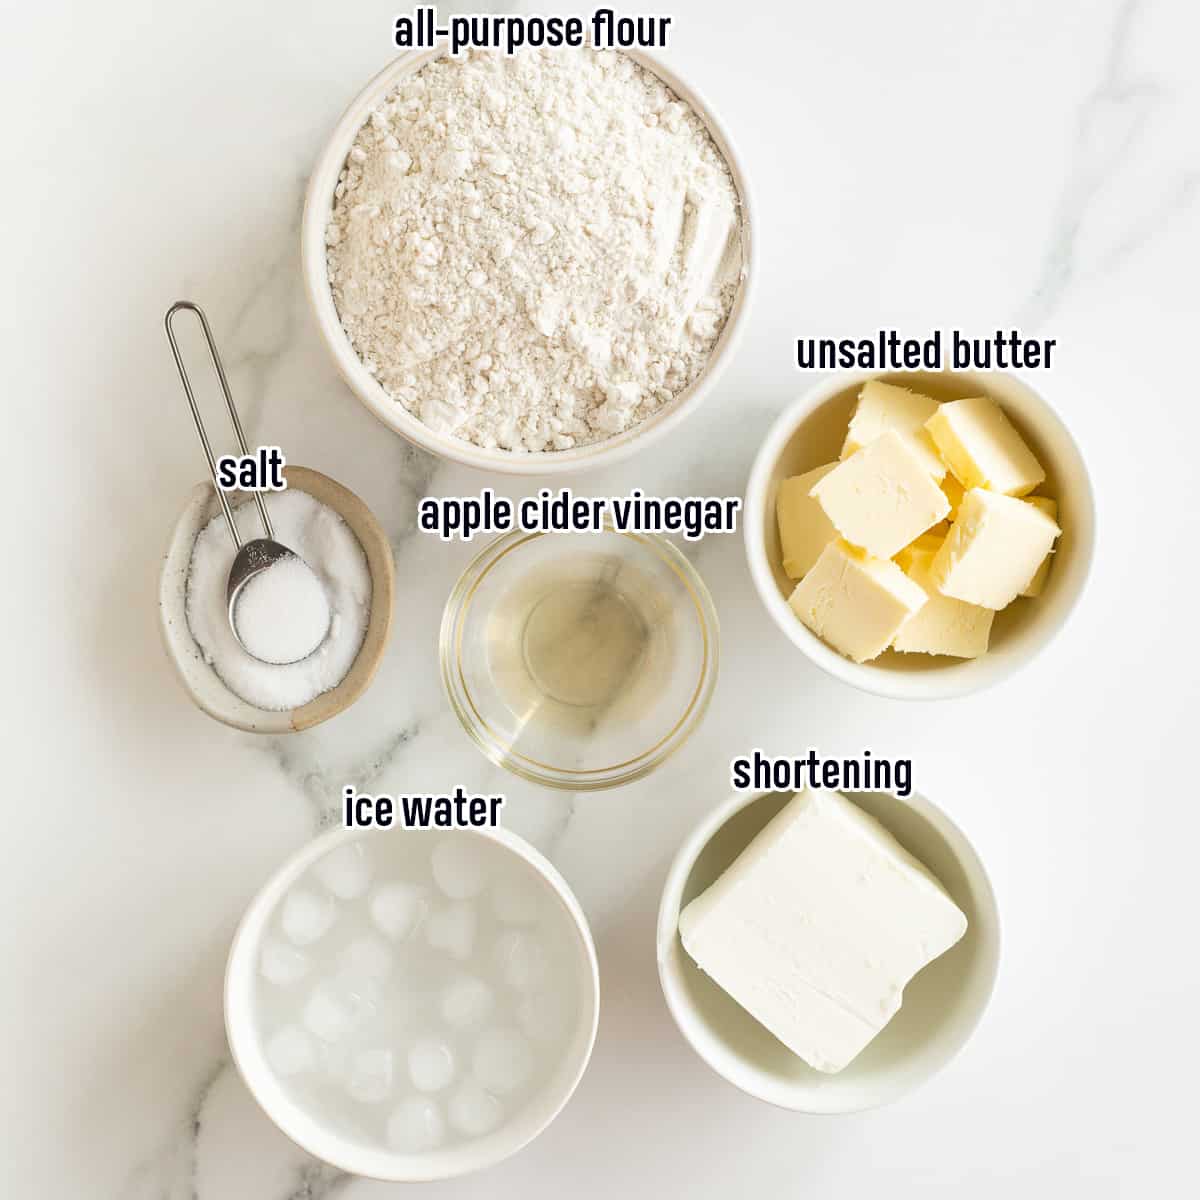 Flour, butter, shortening, apple cider vinegar, salt, and ice water in bowls with text.